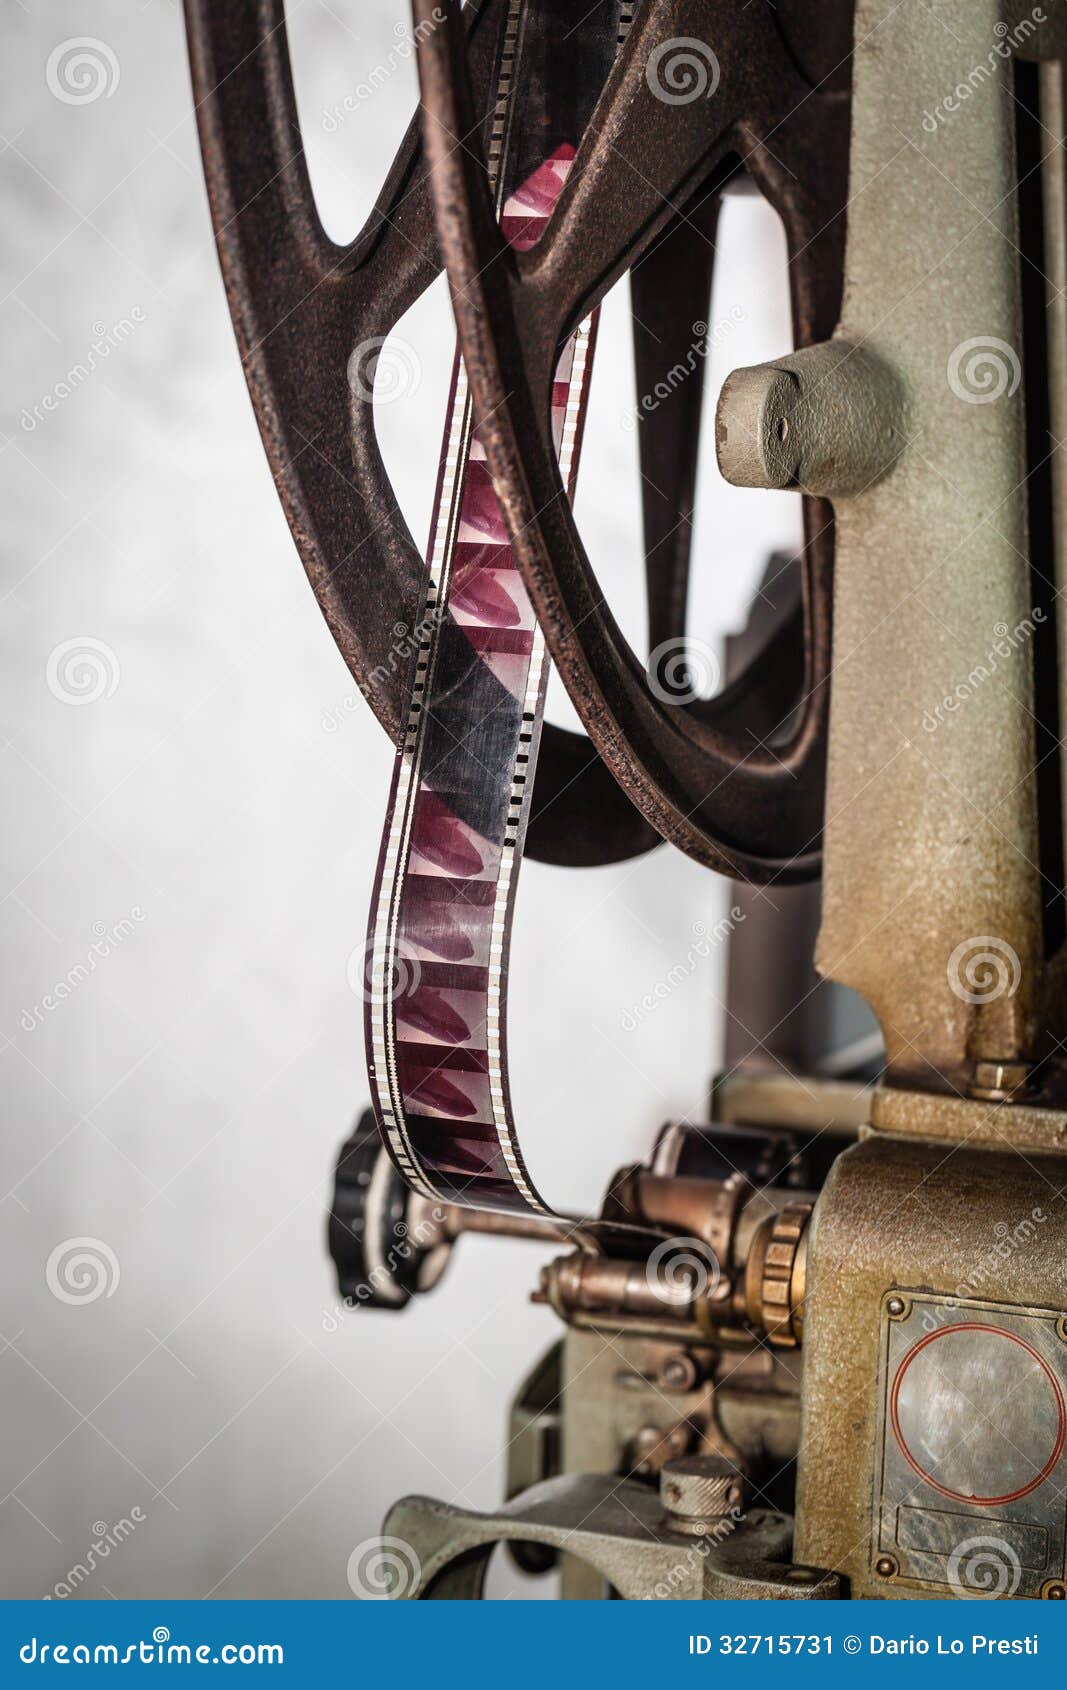 Film reel stock image. Image of filmroll, play, oldfashioned - 32715731